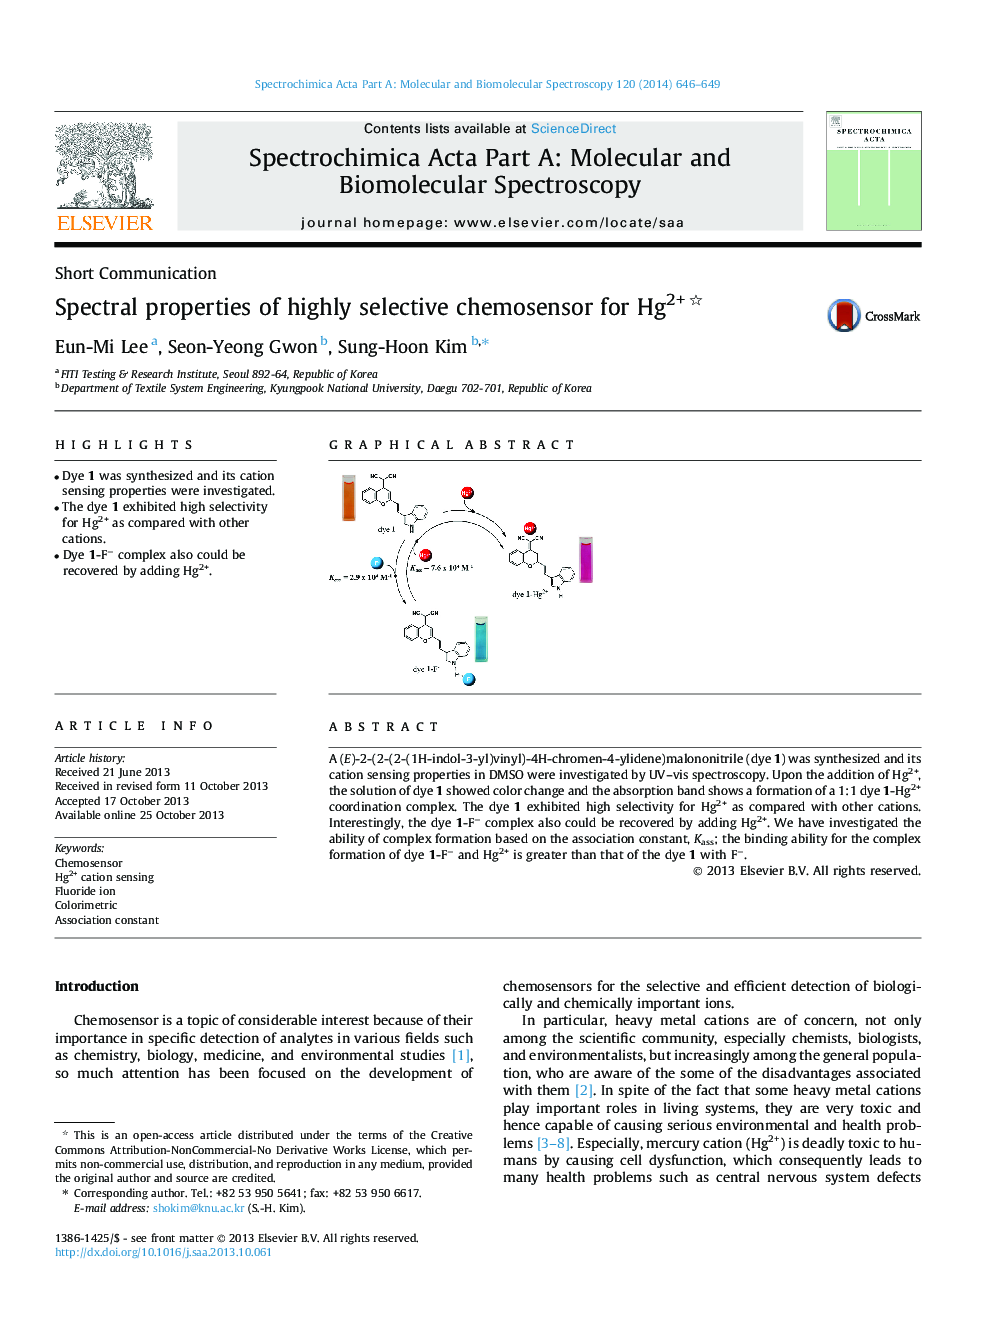 Spectral properties of highly selective chemosensor for Hg2+